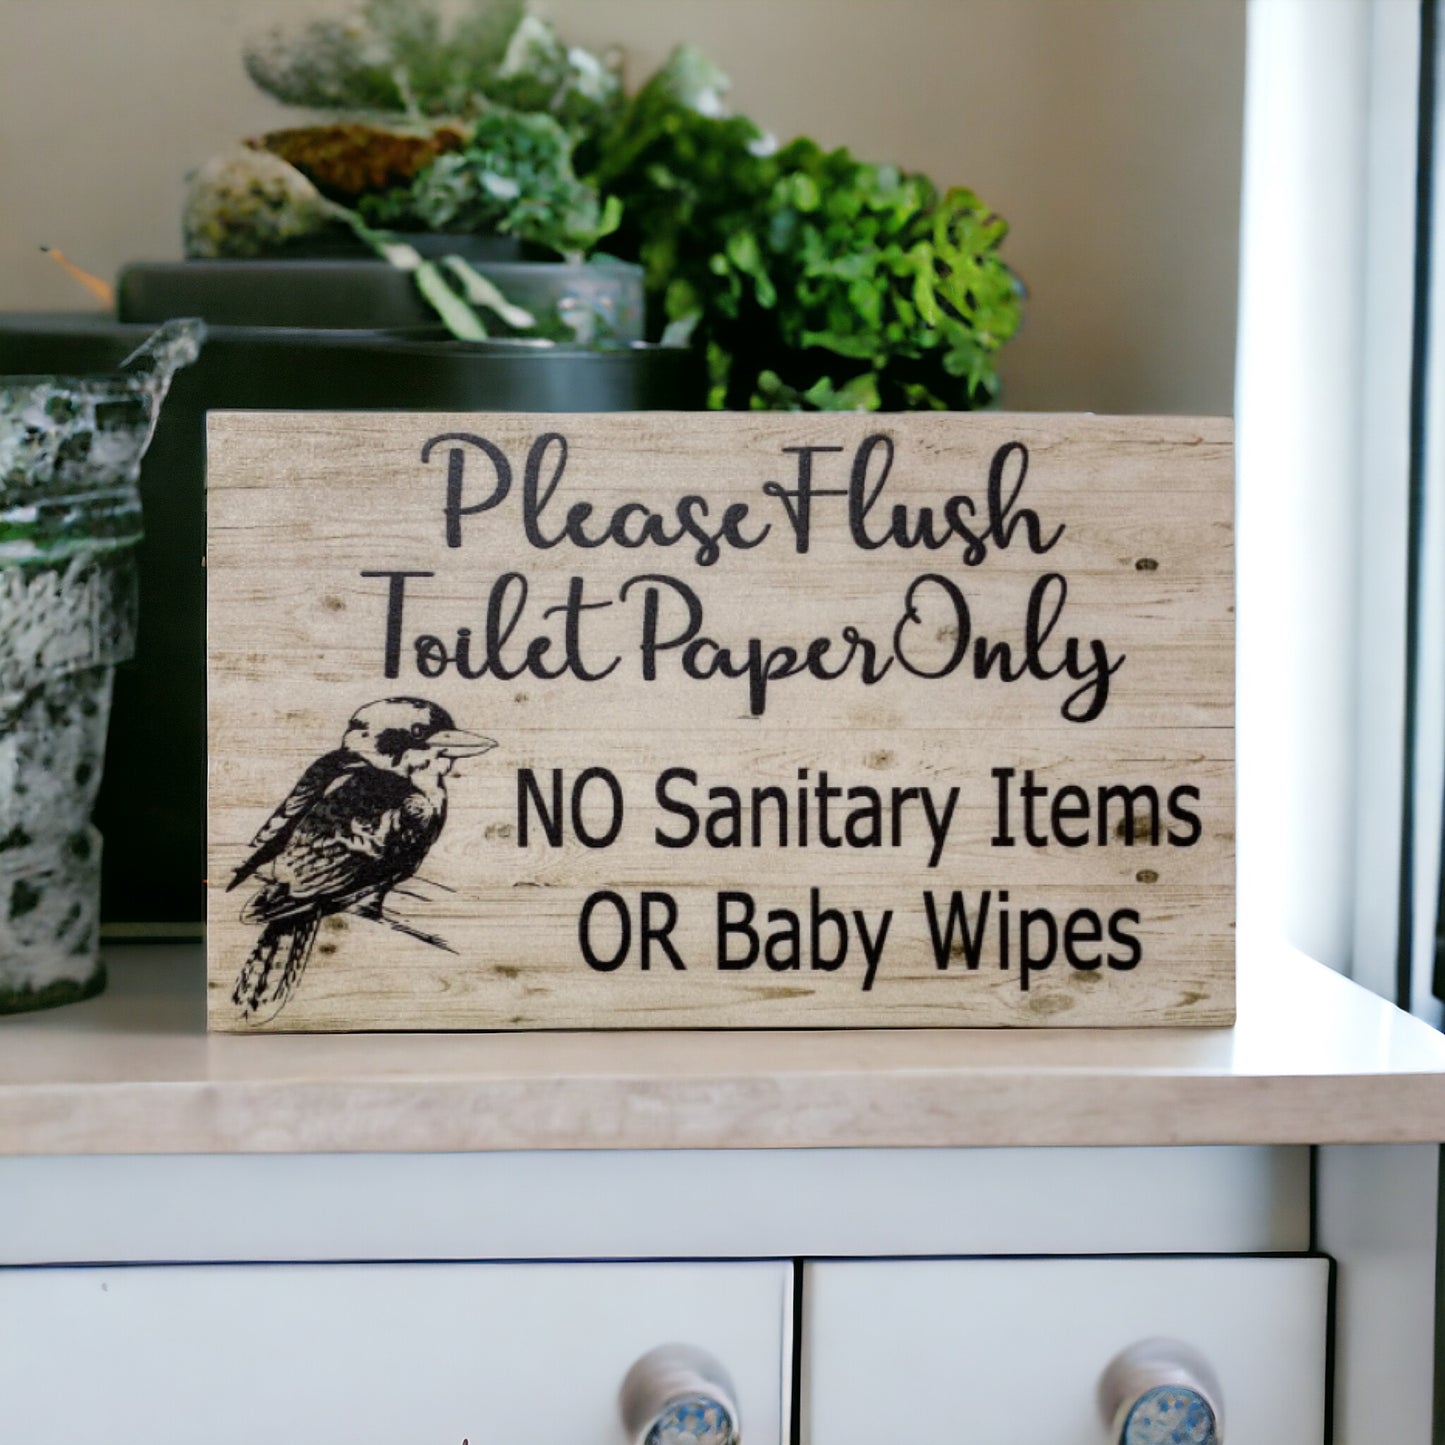 Flush Toilet Paper Only No Sanitary Baby Wipes  Kookaburra Sign - The Renmy Store Homewares & Gifts 